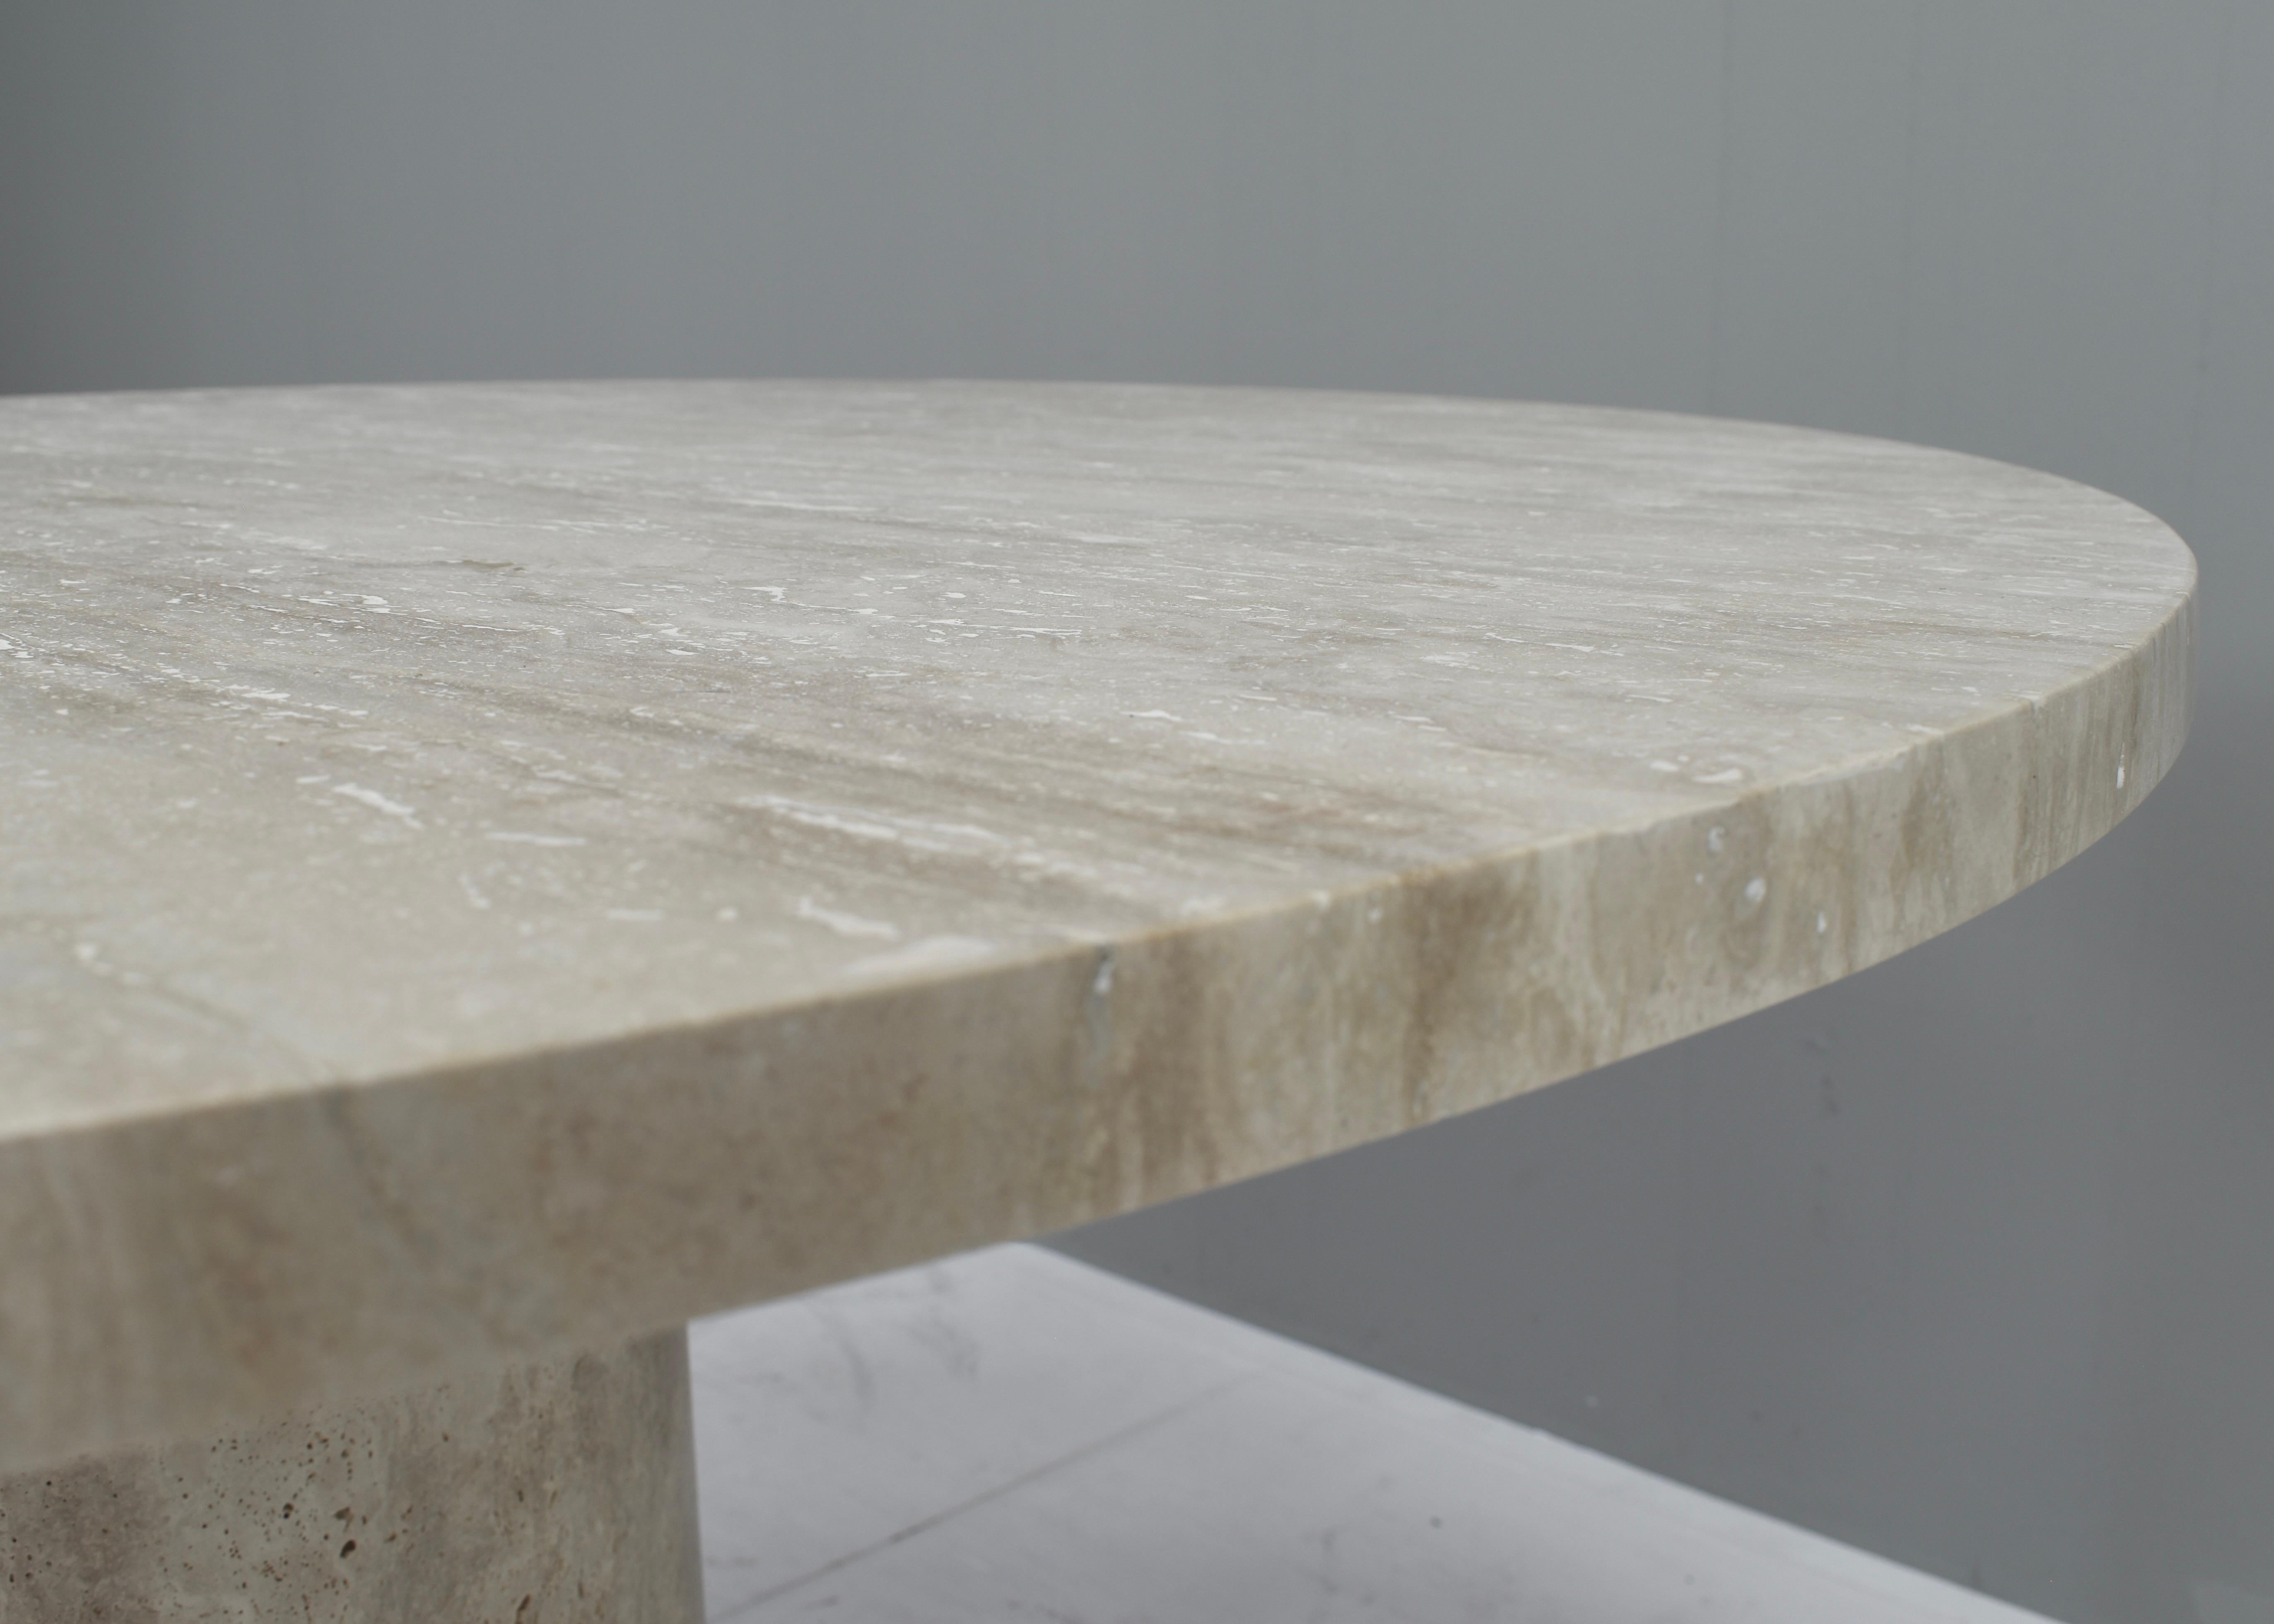 Exquisite Round Travertine Dining Table in the manor of Up& Up and Mangiarotti 8